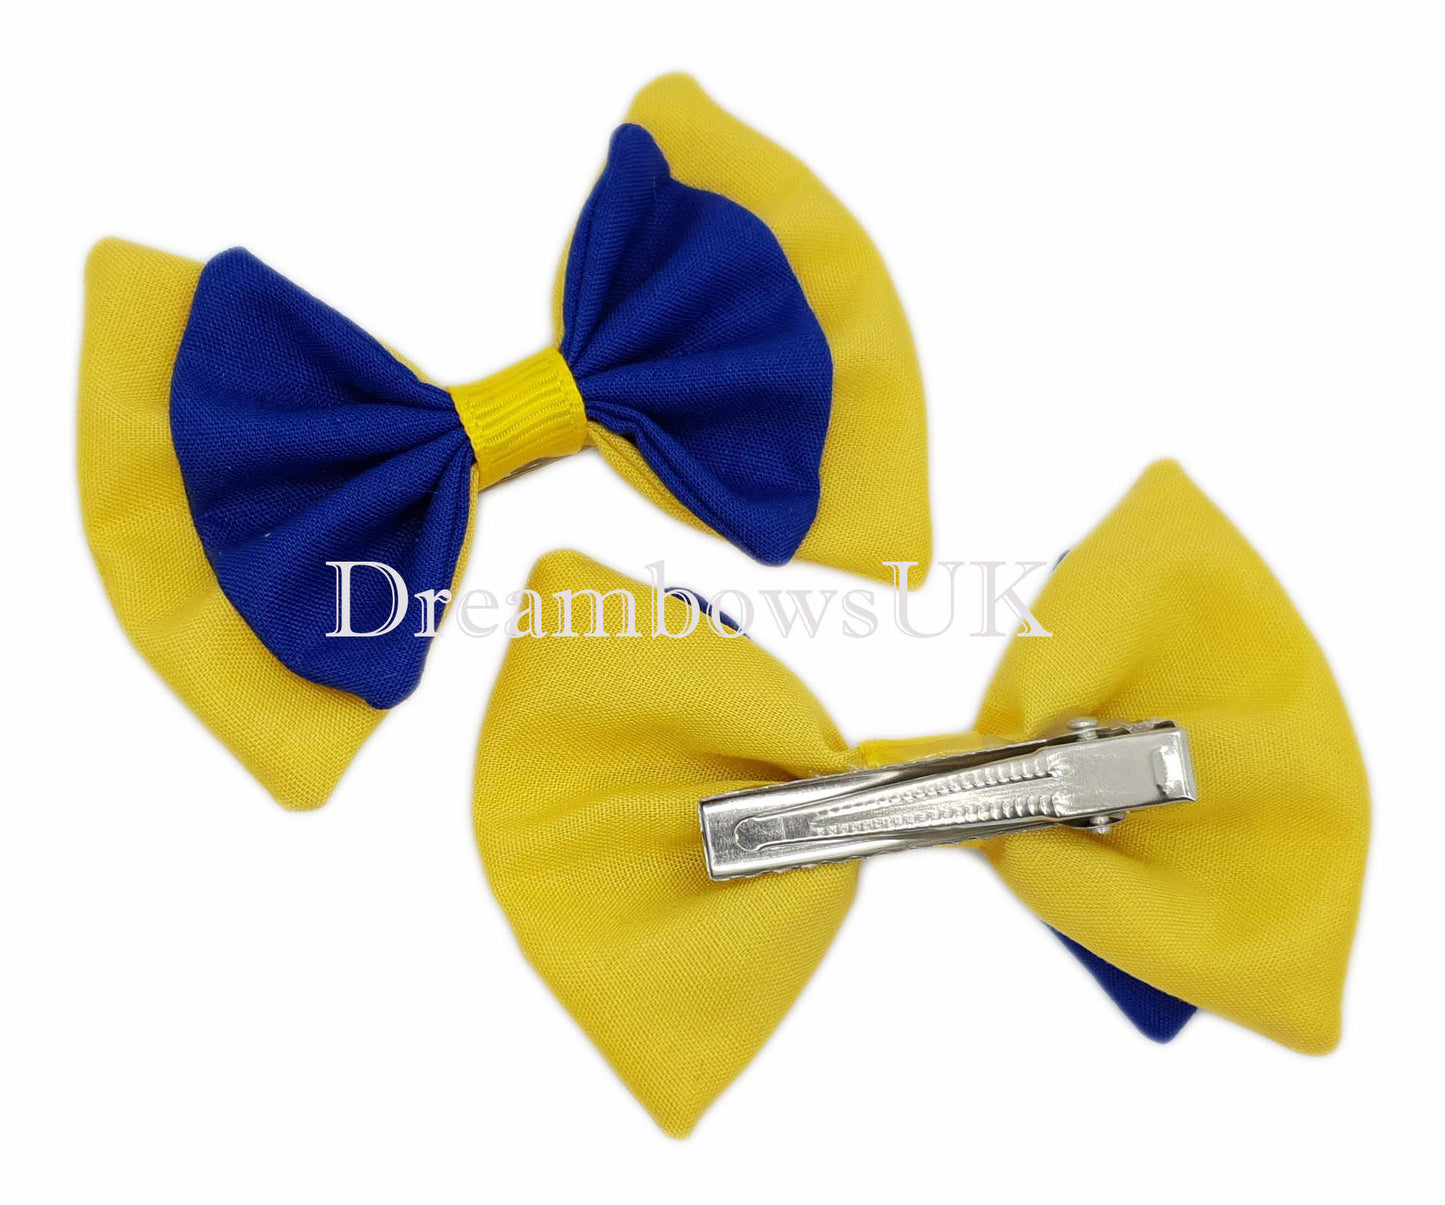 2x Royal blue and golden yellow fabric hair bows